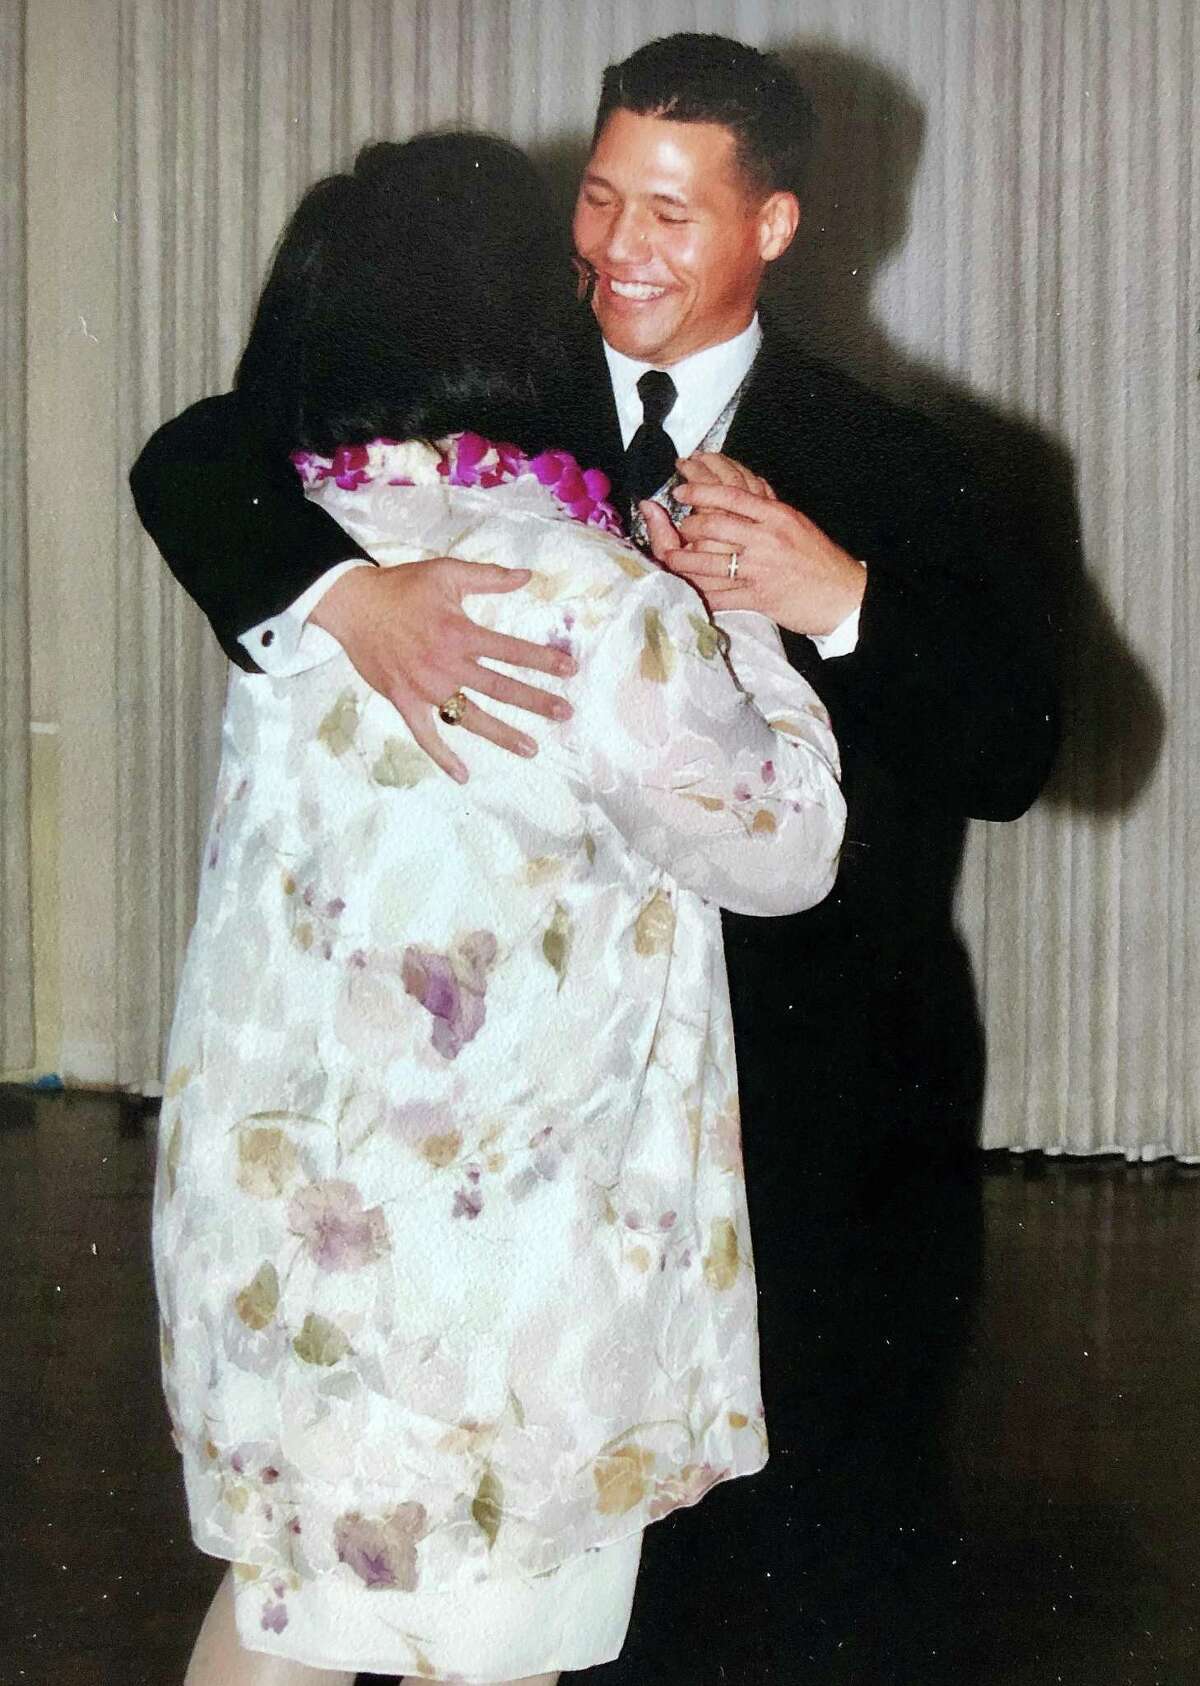 Melton gets a dance with his mom before she passed away in November 2015.